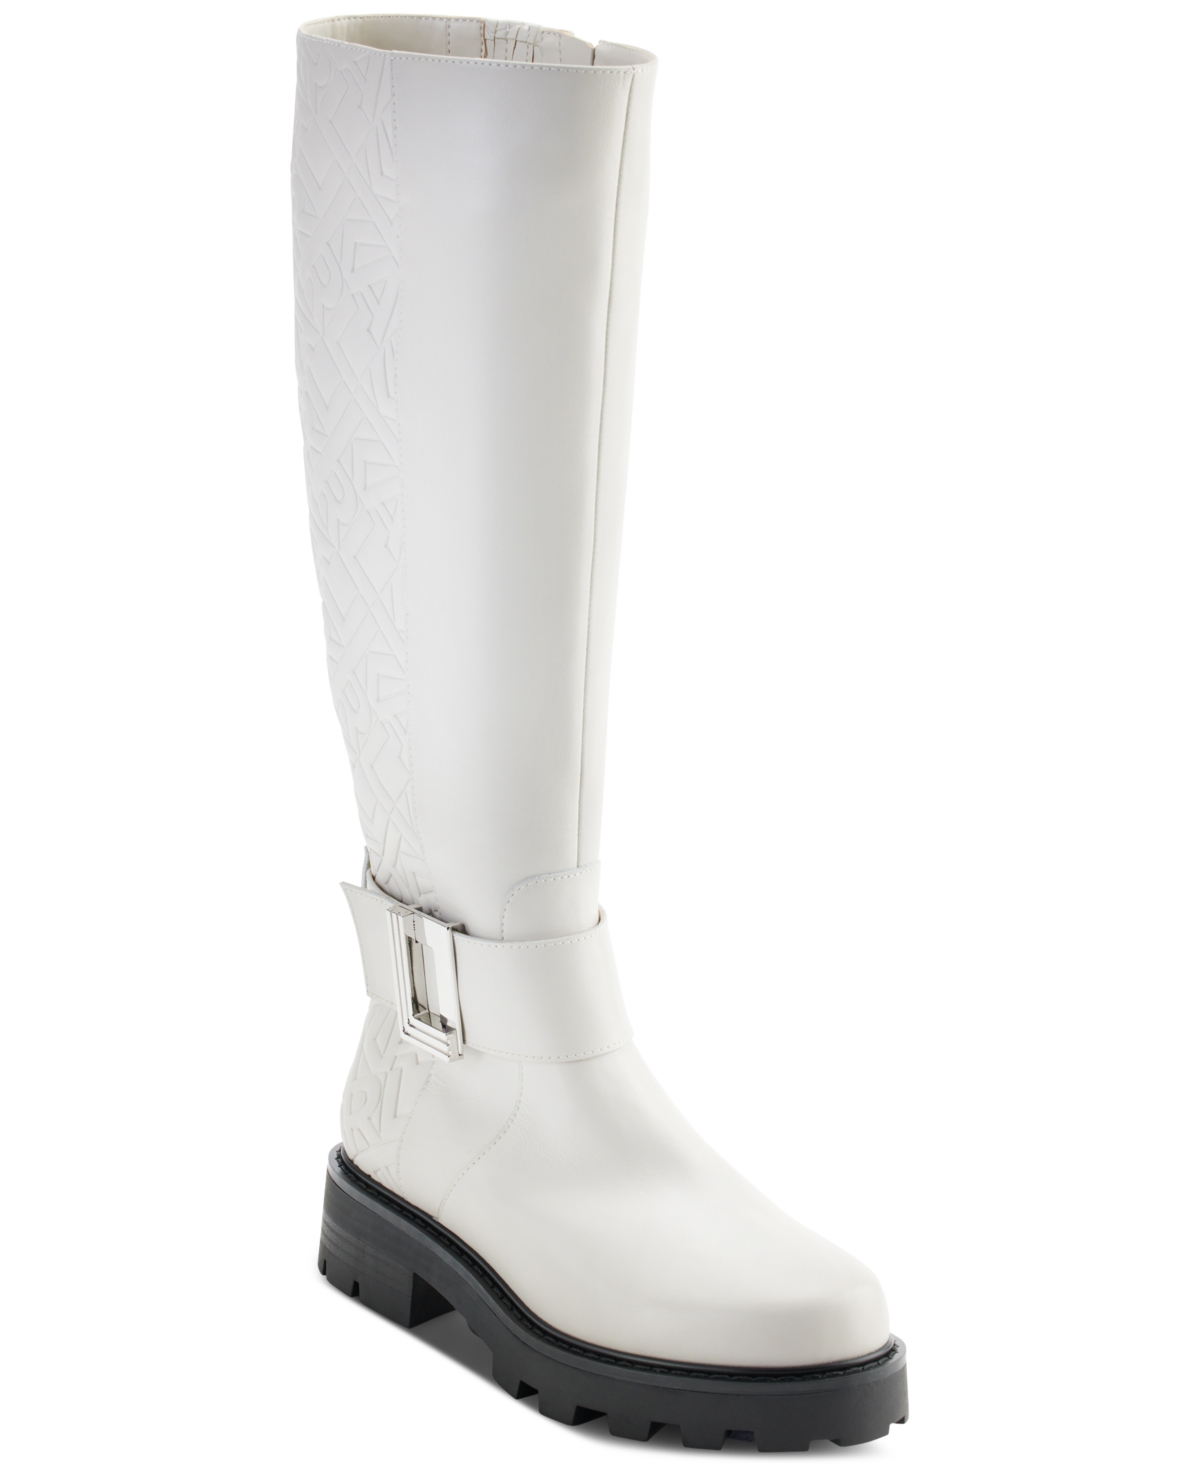 Karl Lagerfeld Women's Meara Buckled Riding Boots In Sw:soft White